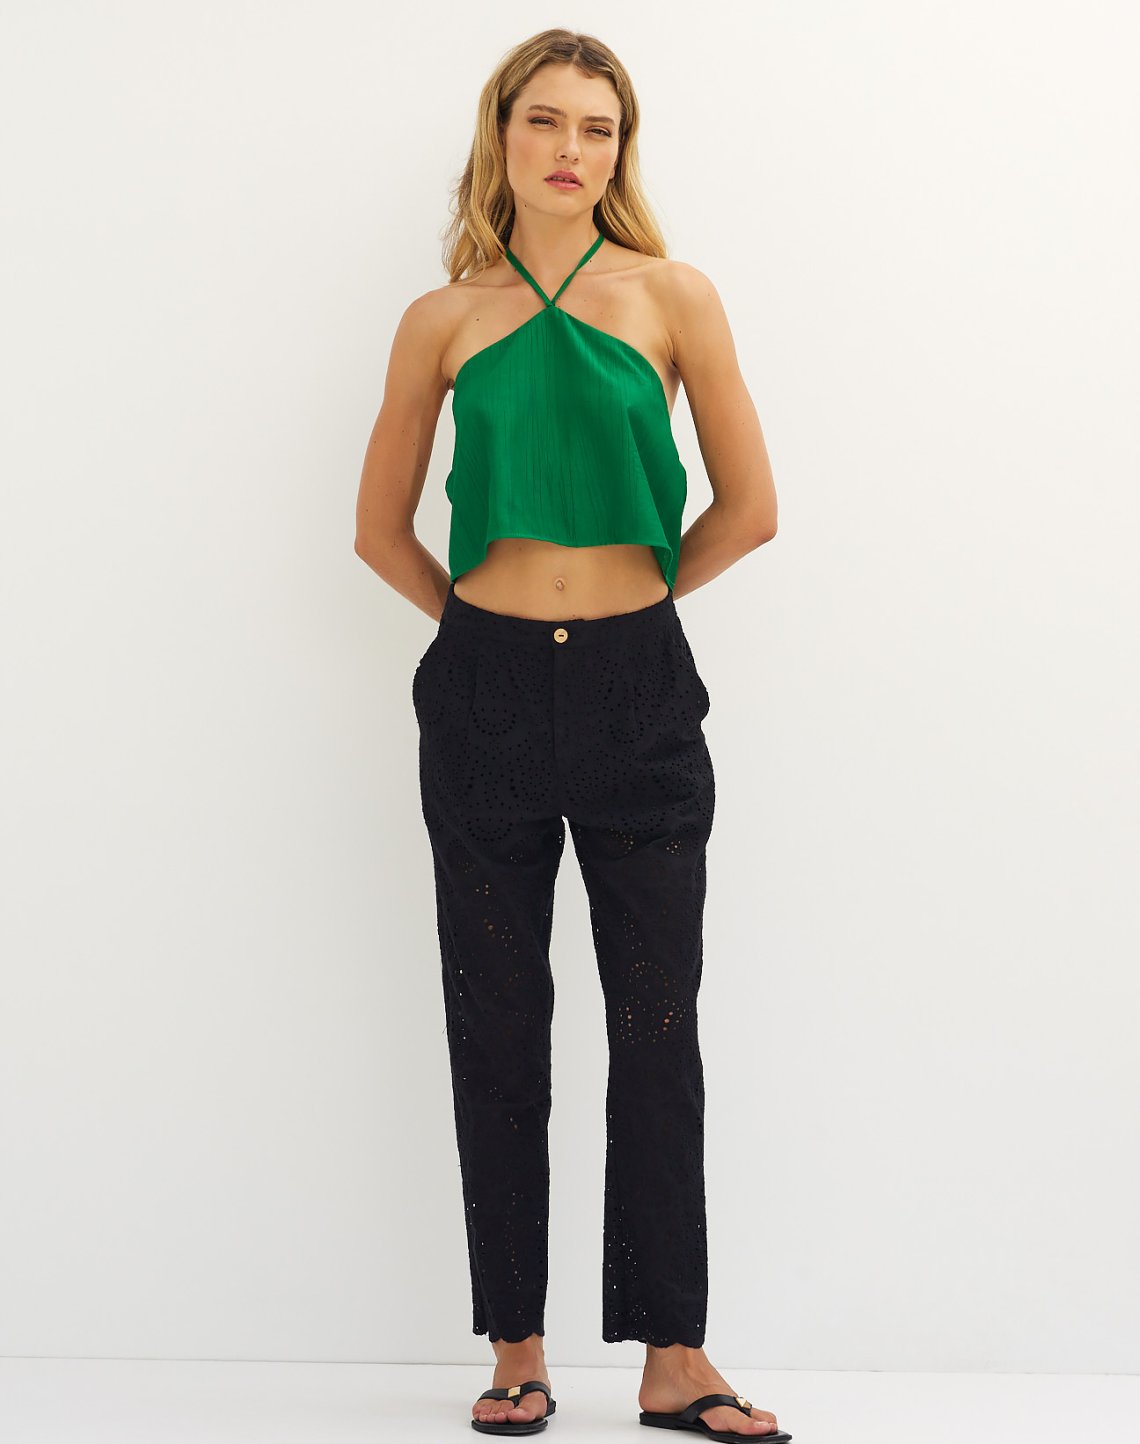 Embroidery trousers